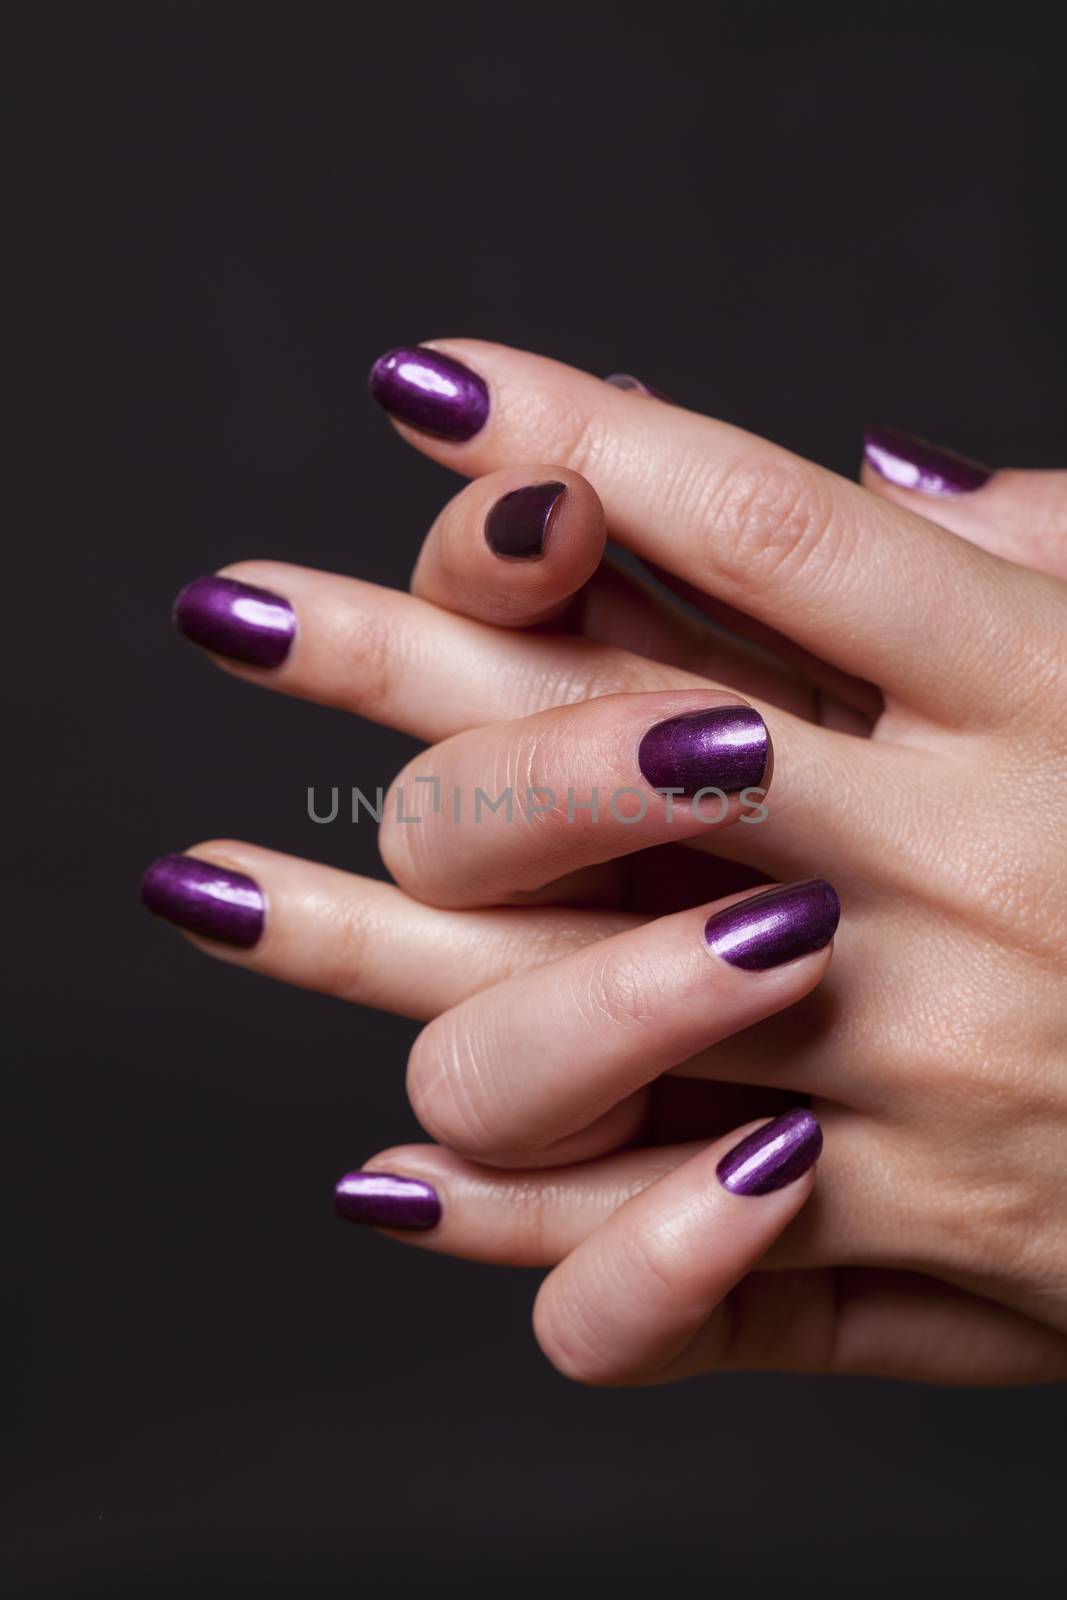 Close up of crossed over female hands decorated with purple fingernail paint over black